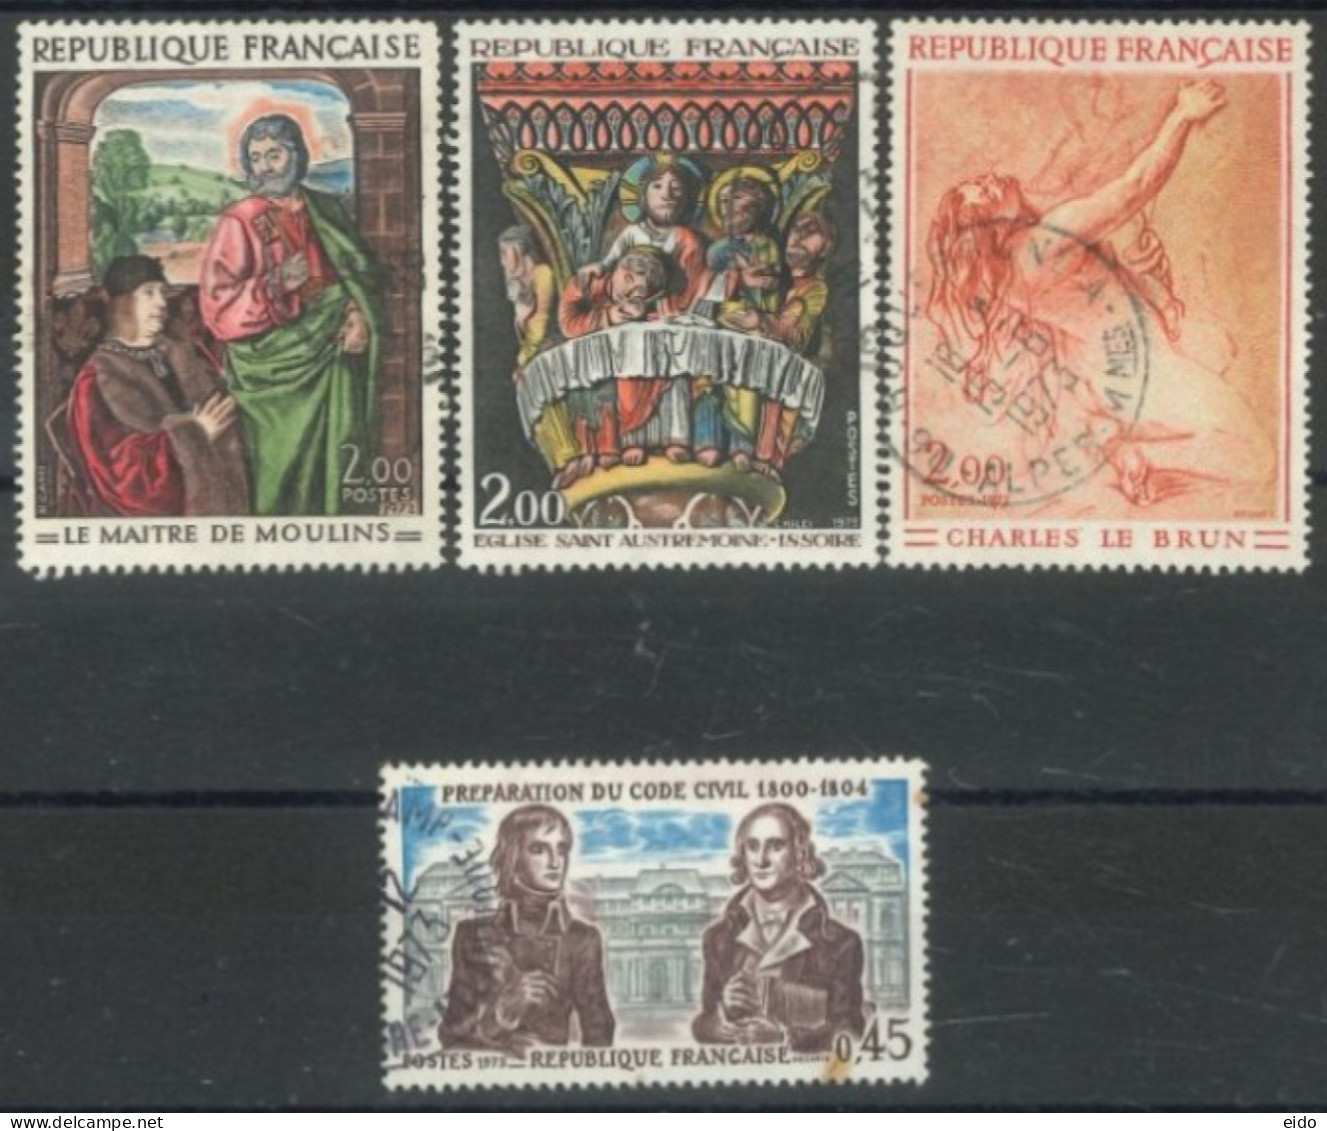 FRANCE - 1972/73, POLYCHROME PAINTINGS & HISTORY OF FRANCE STAMPS SET OF 4,  USED - Used Stamps